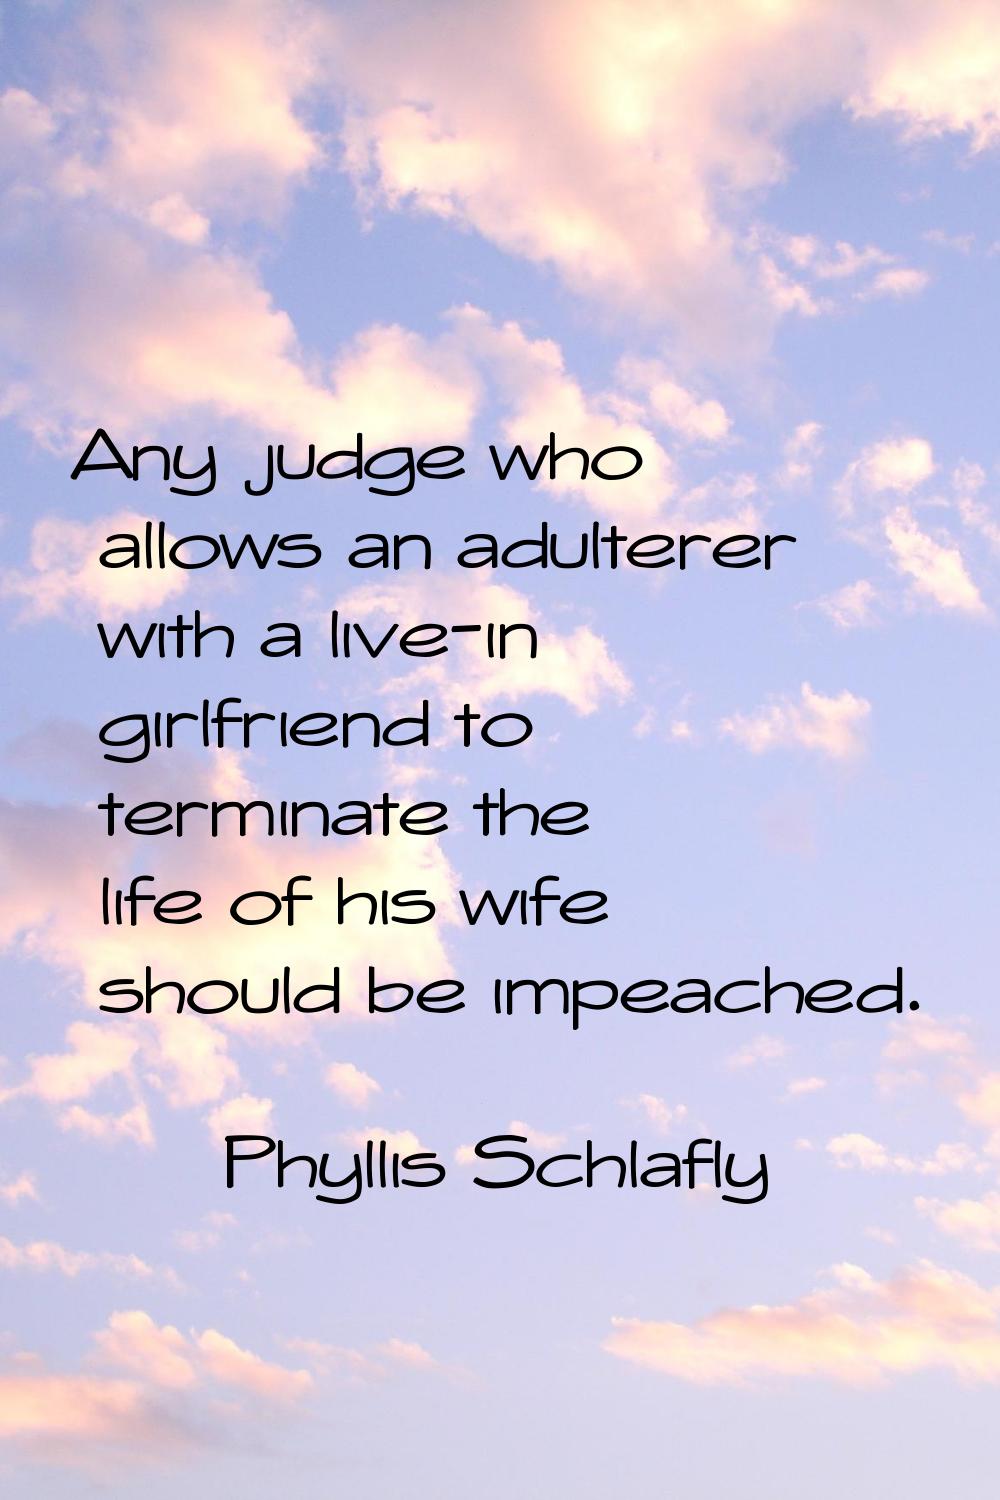 Any judge who allows an adulterer with a live-in girlfriend to terminate the life of his wife shoul